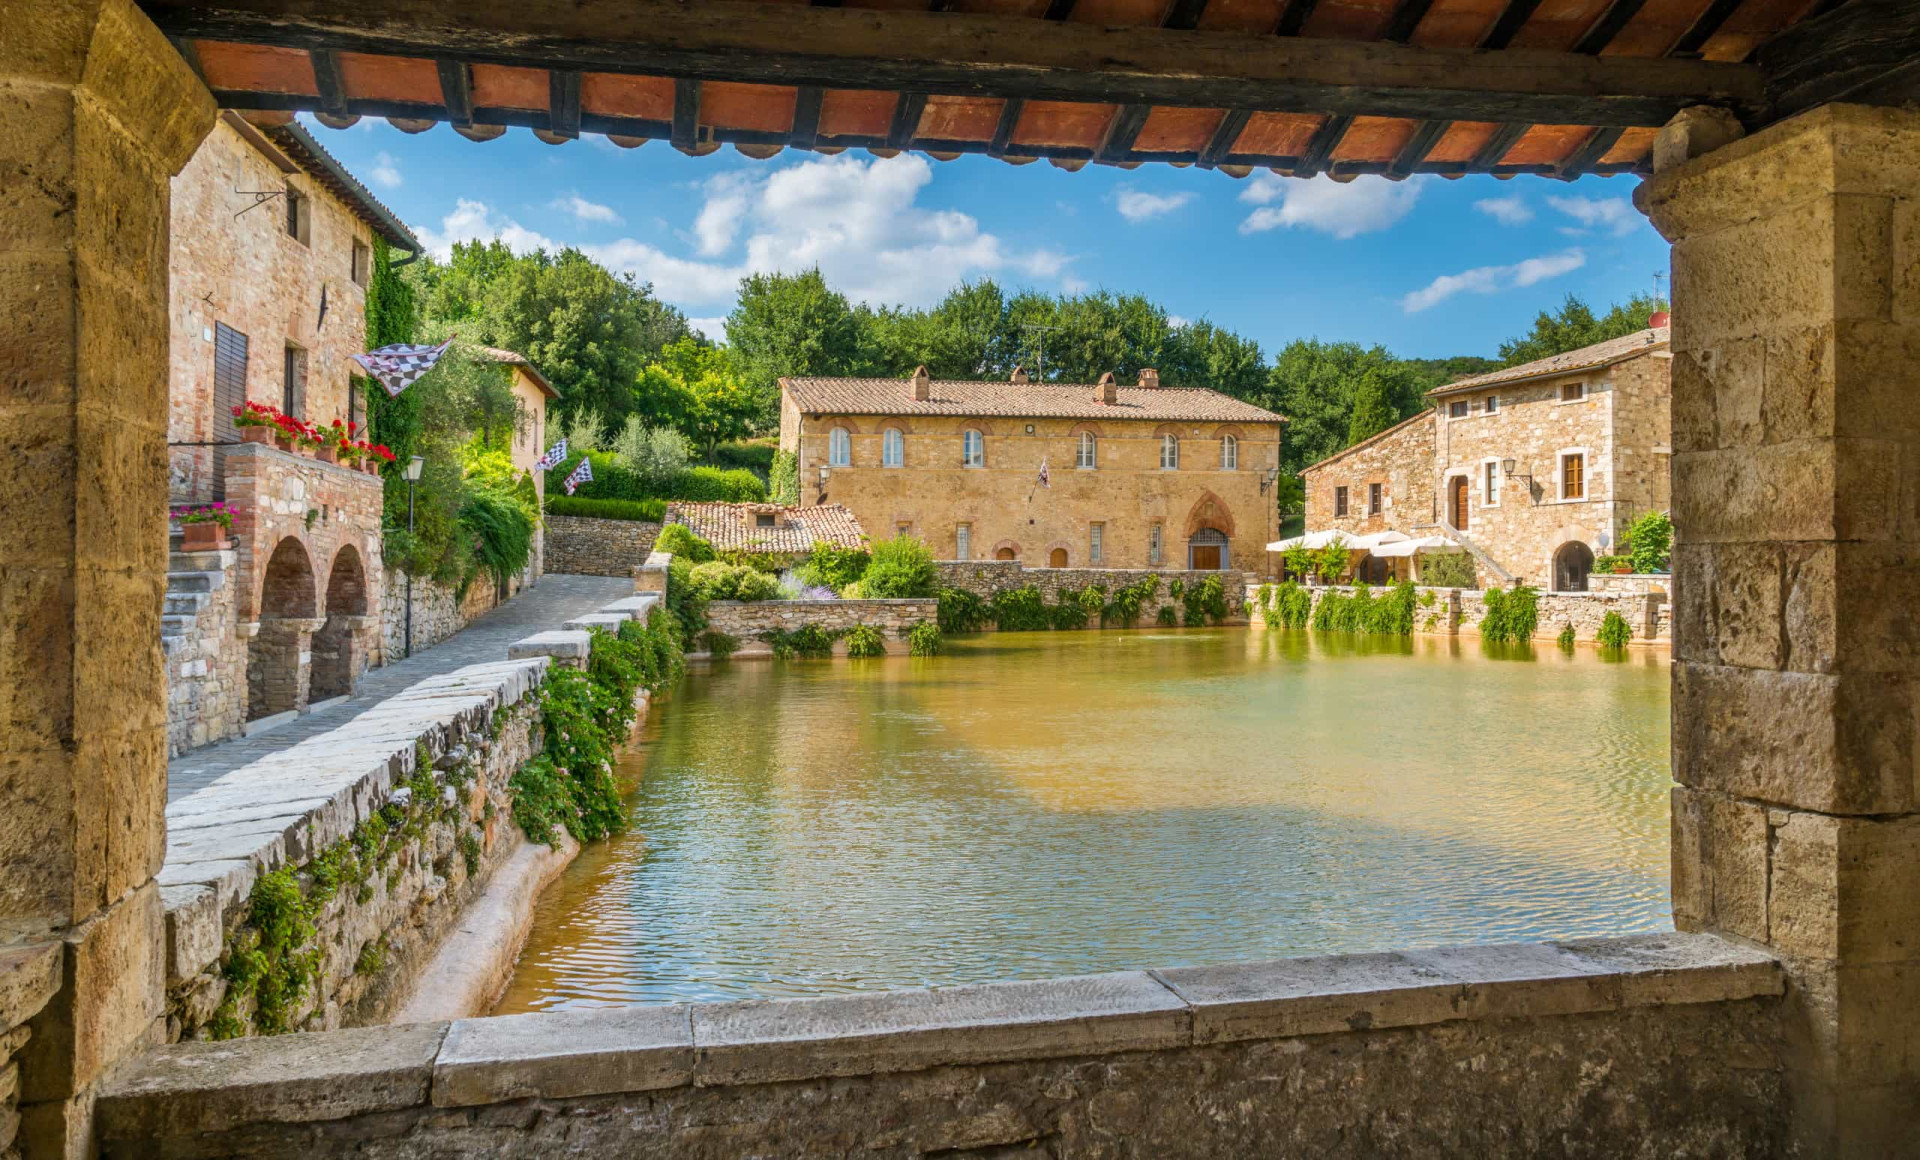 <p>Renowned over the centuries for its volcanic springs, the picturesque village of Bagno Vignoni is situated on a hill above the Val d'Orcia.</p><p>You may also like:<a href="https://www.starsinsider.com/n/318917?utm_source=msn.com&utm_medium=display&utm_campaign=referral_description&utm_content=481361v4en-en_selected"> Celebrities who have sued their own parents</a></p>